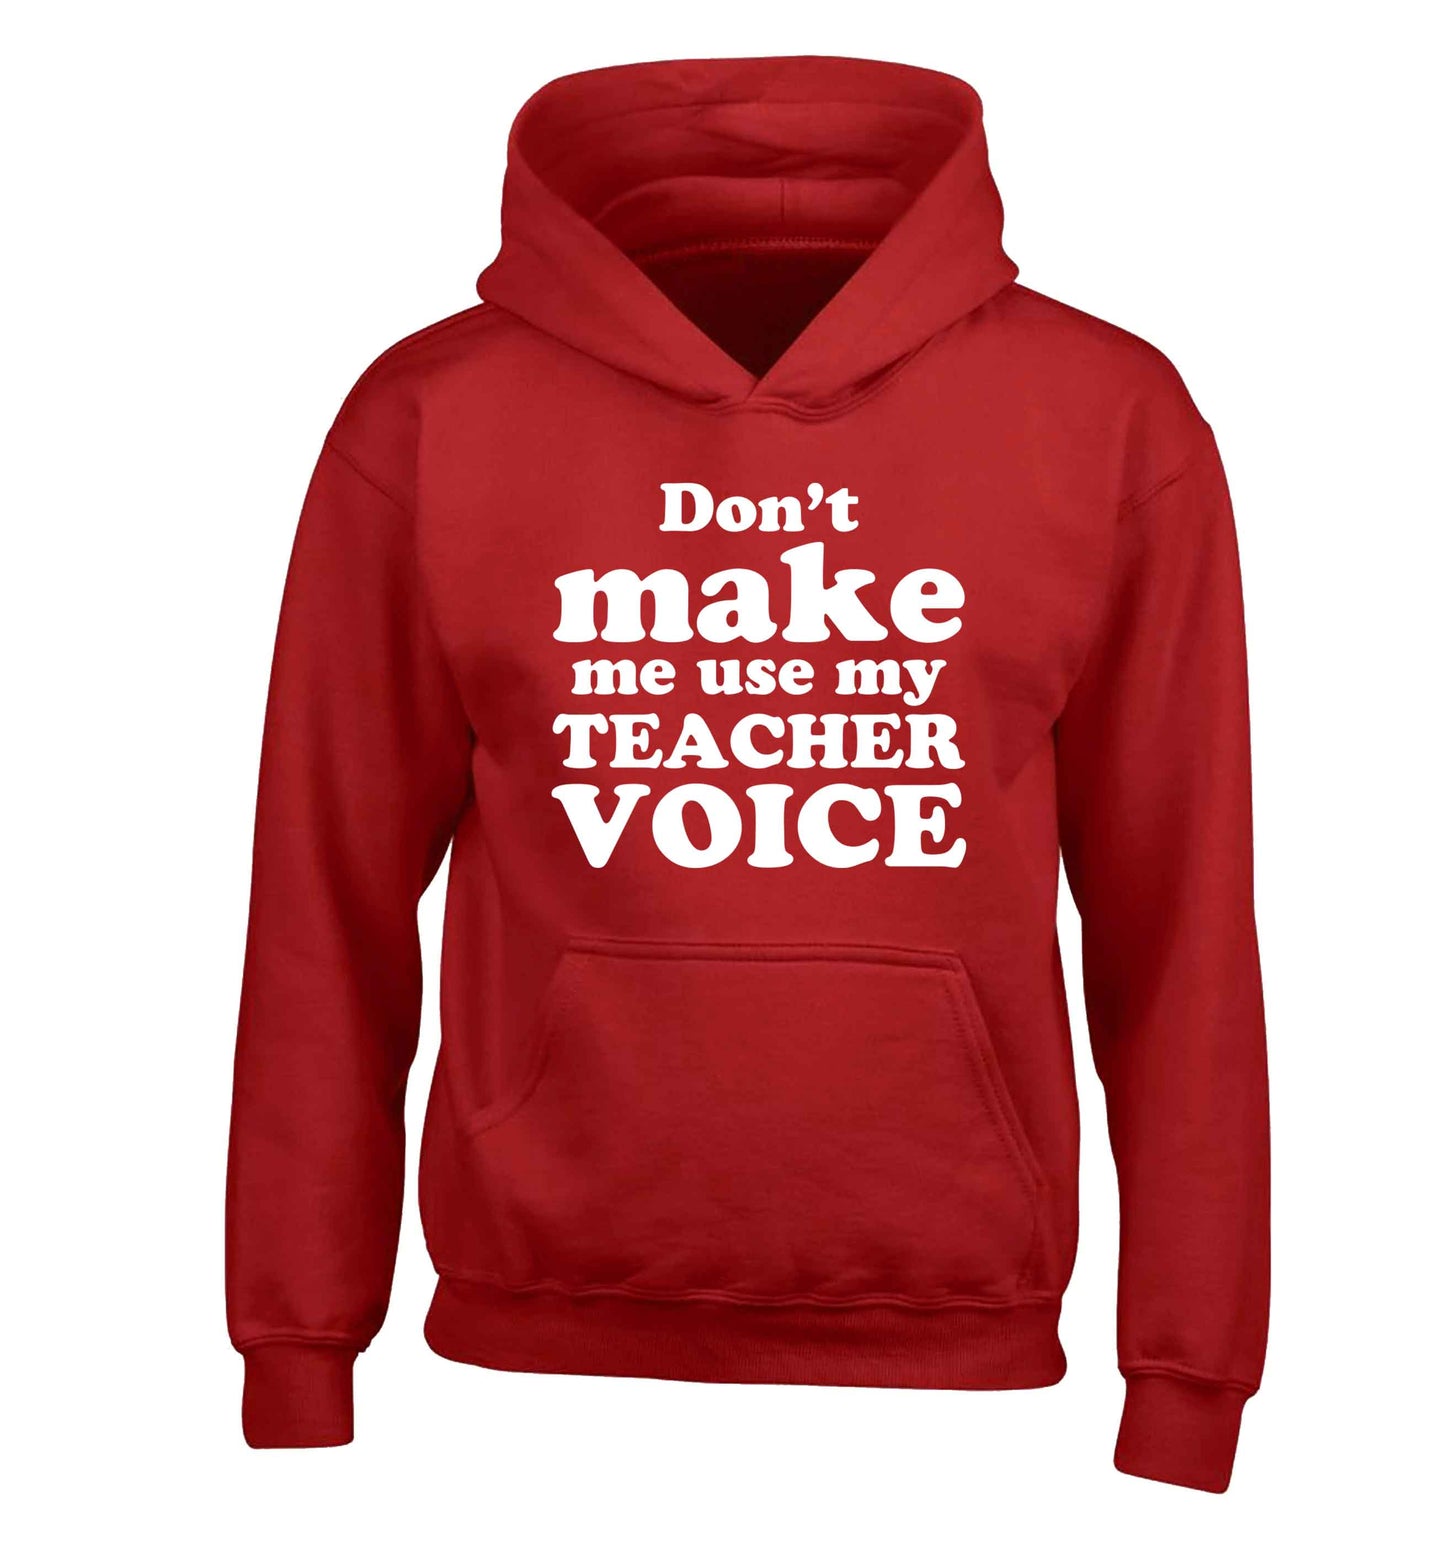 Don't make me use my teacher voice children's red hoodie 12-13 Years